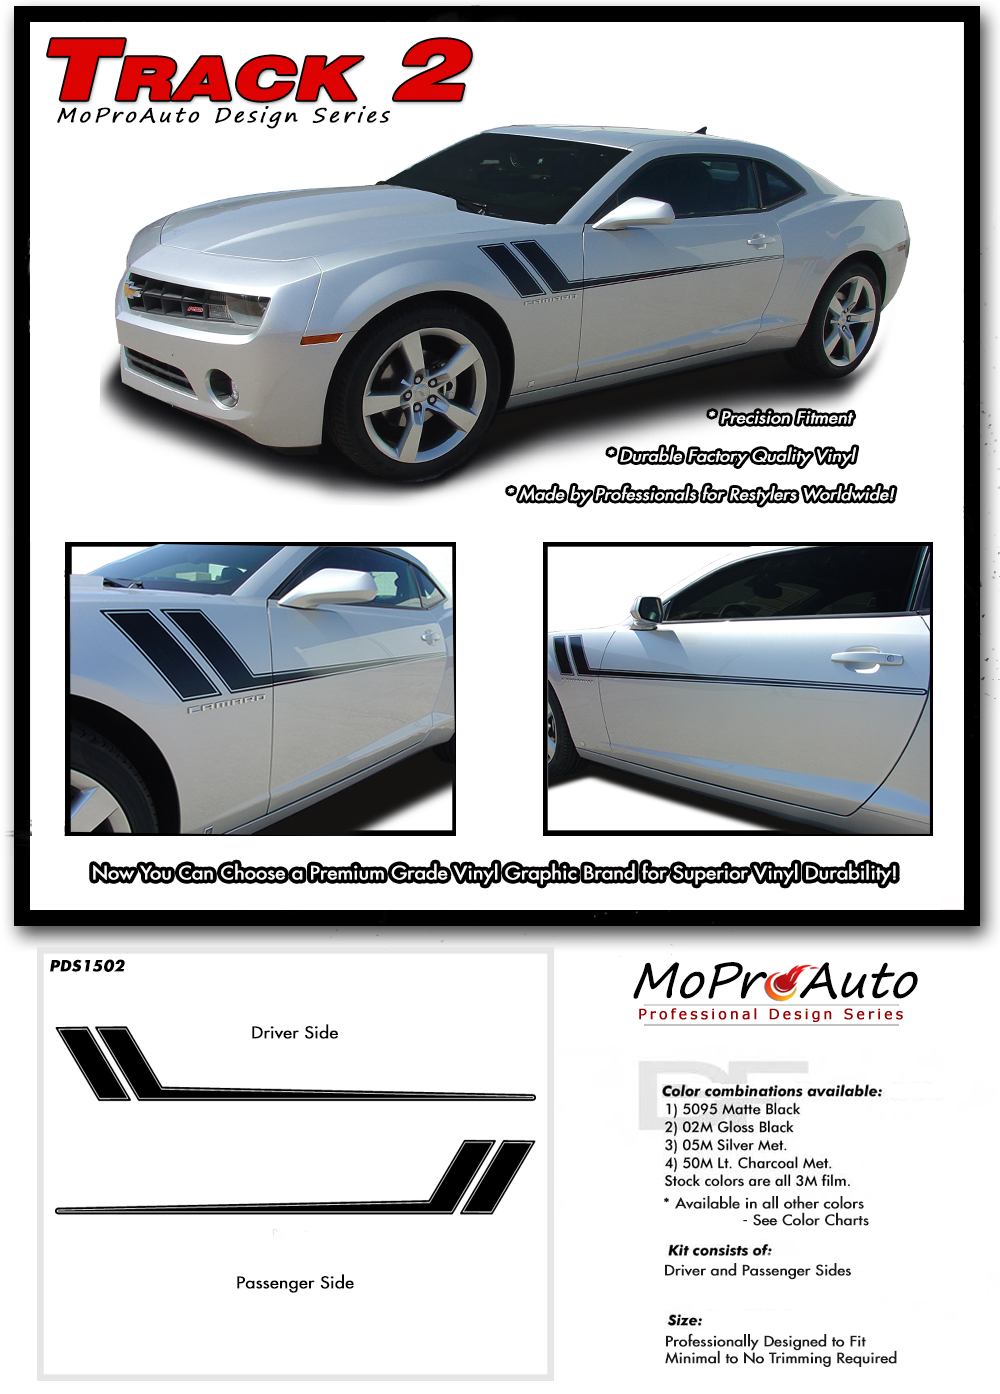 2014-2015 Track Chevy Camaro Vinyl Graphics Kits, Decals, Stripes by MoProAuto